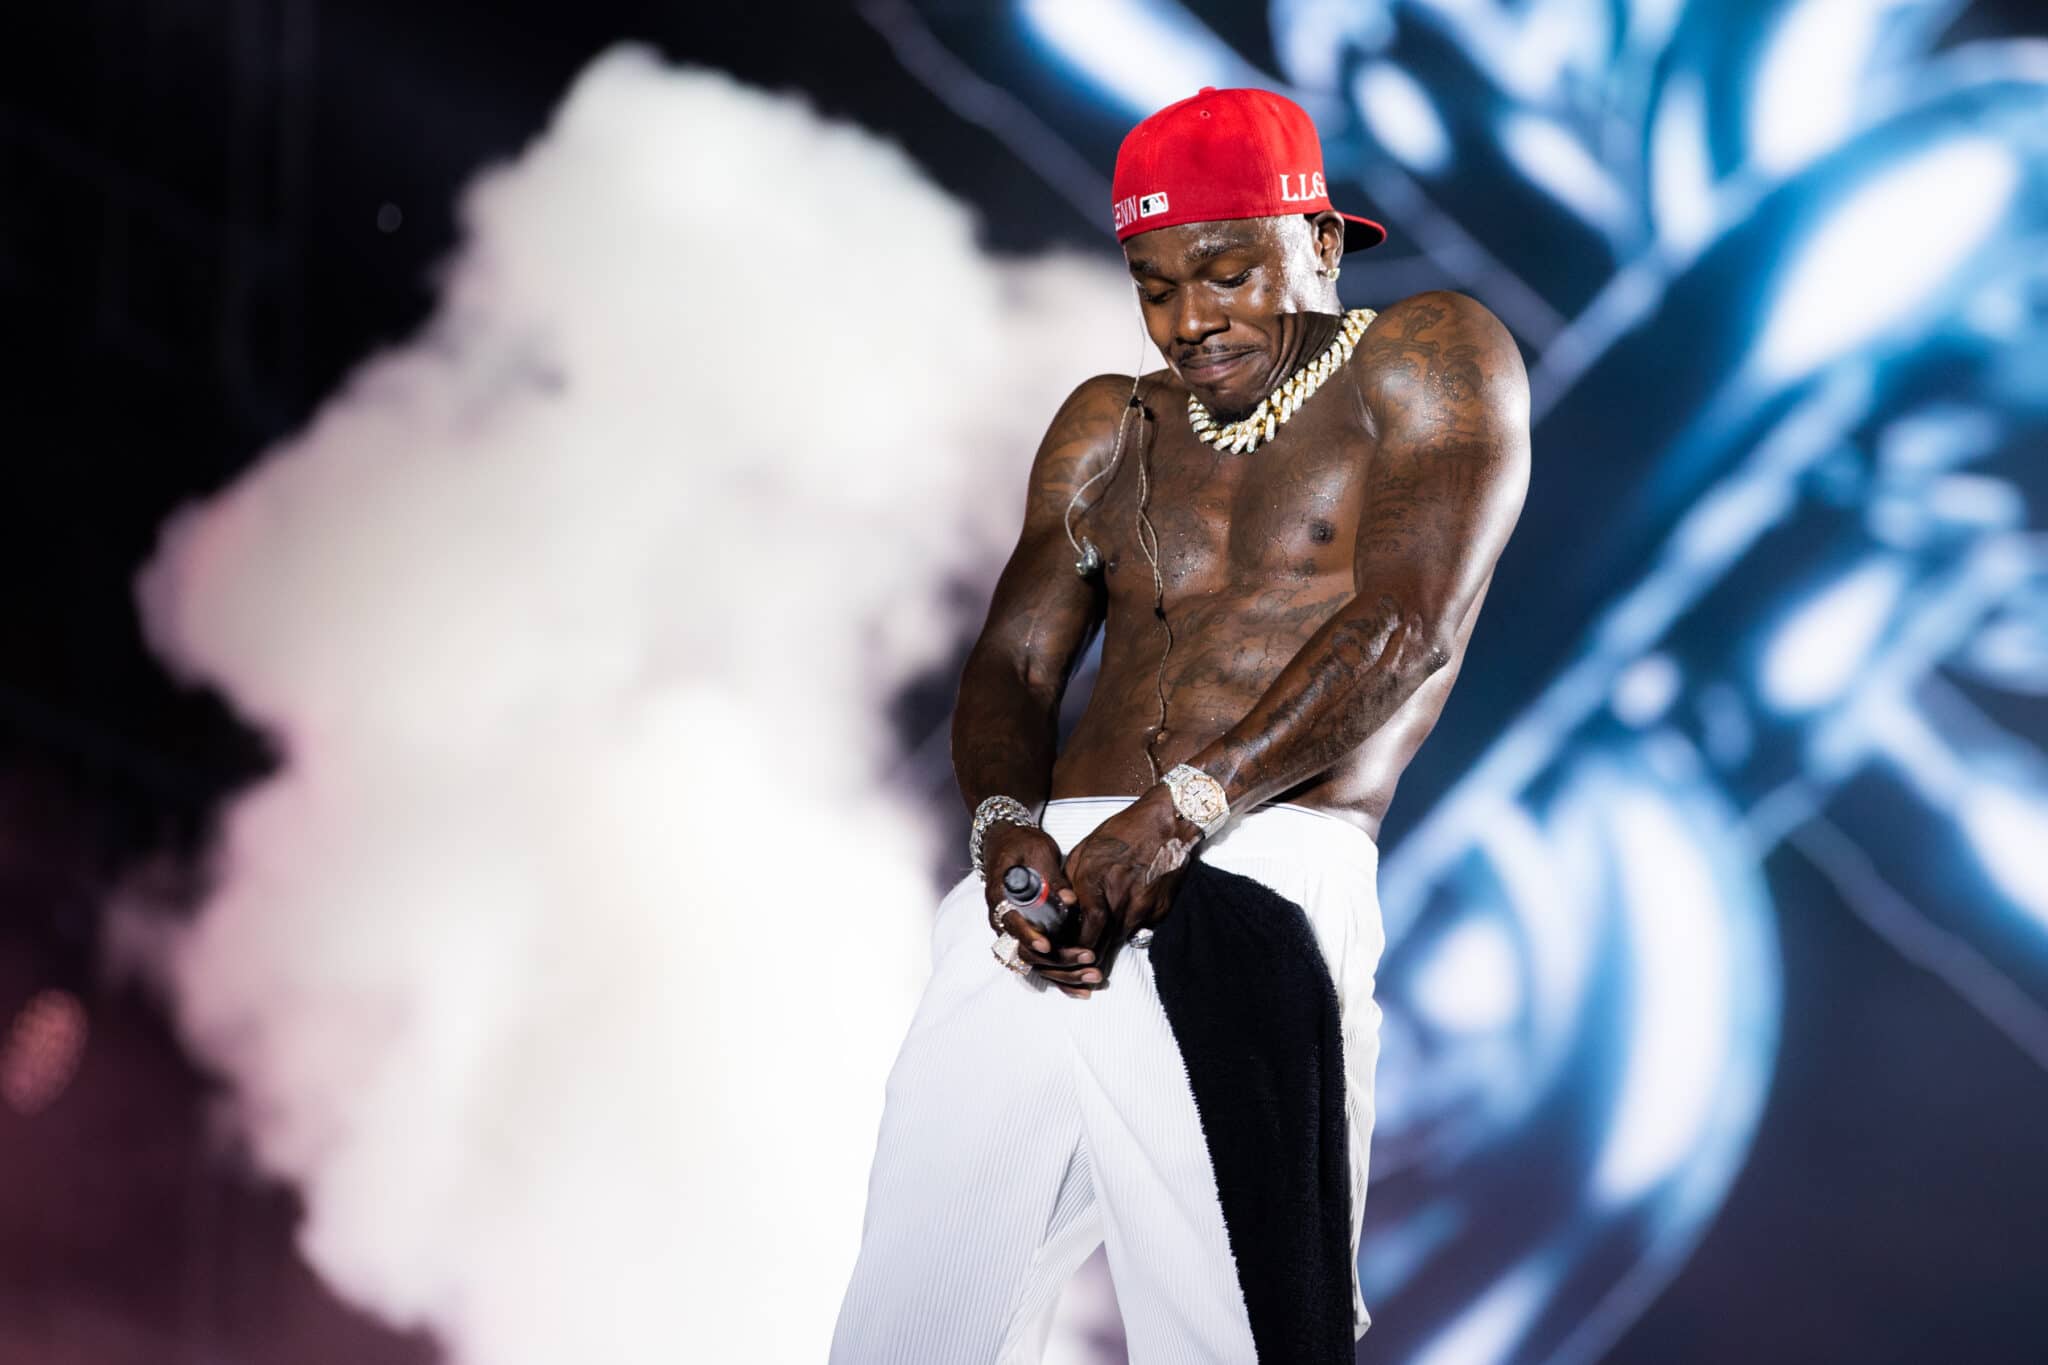 DaBaby unveils summer collection with fashion brand boohooMAN (photos)